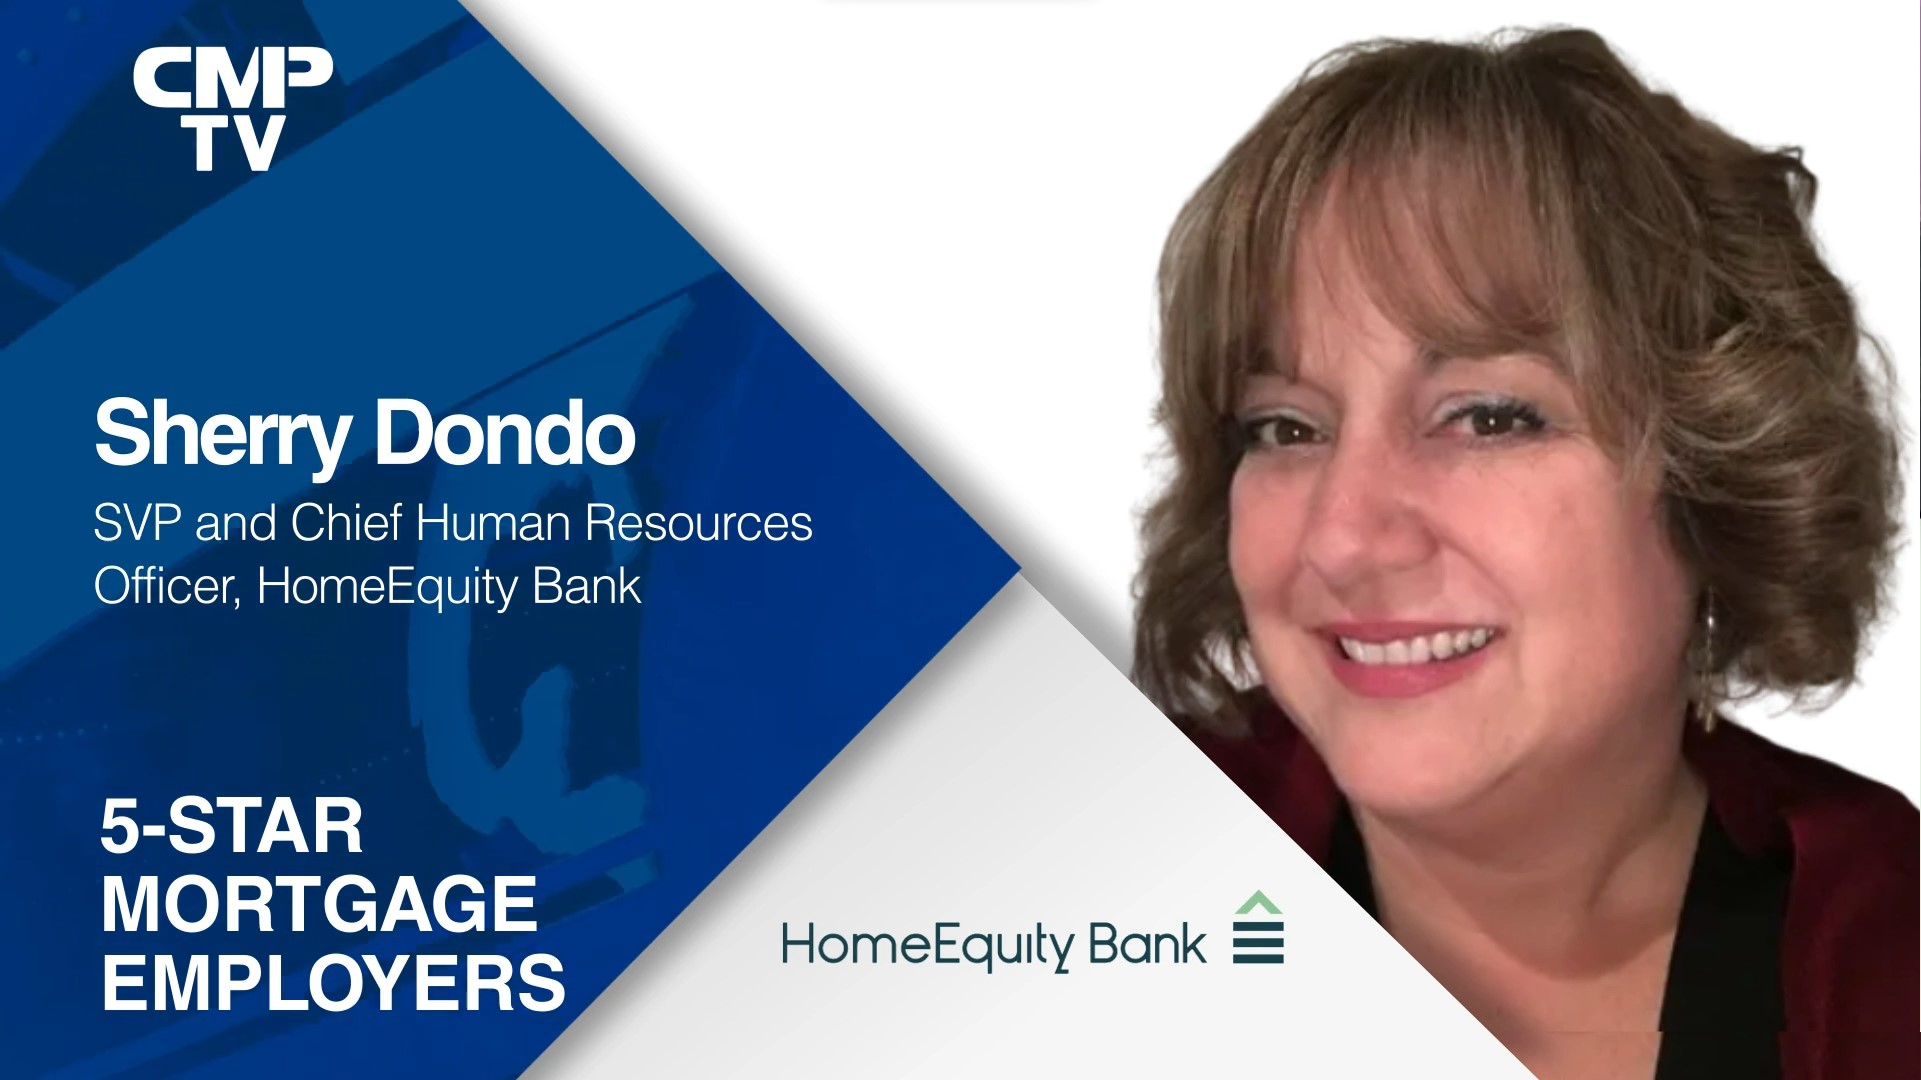 What makes HomeEquity Bank a 5-Star Mortgage Employer?